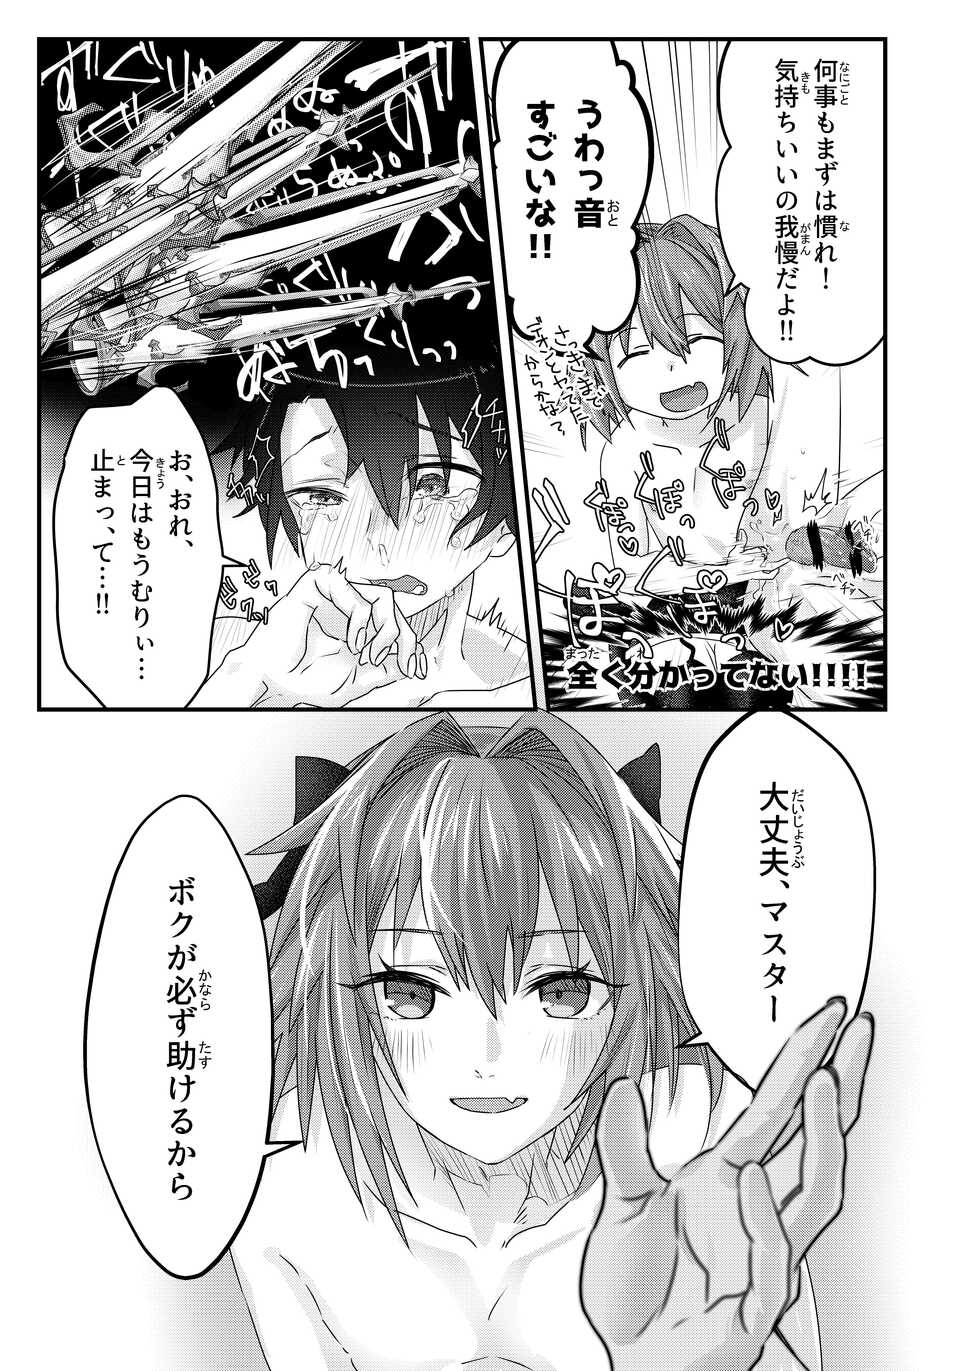 [Oniichan no Imouto (Oniichan no Imouto)] Anal, Anali, Analedomo (Fate/Grand Order) [Digital] - Page 32